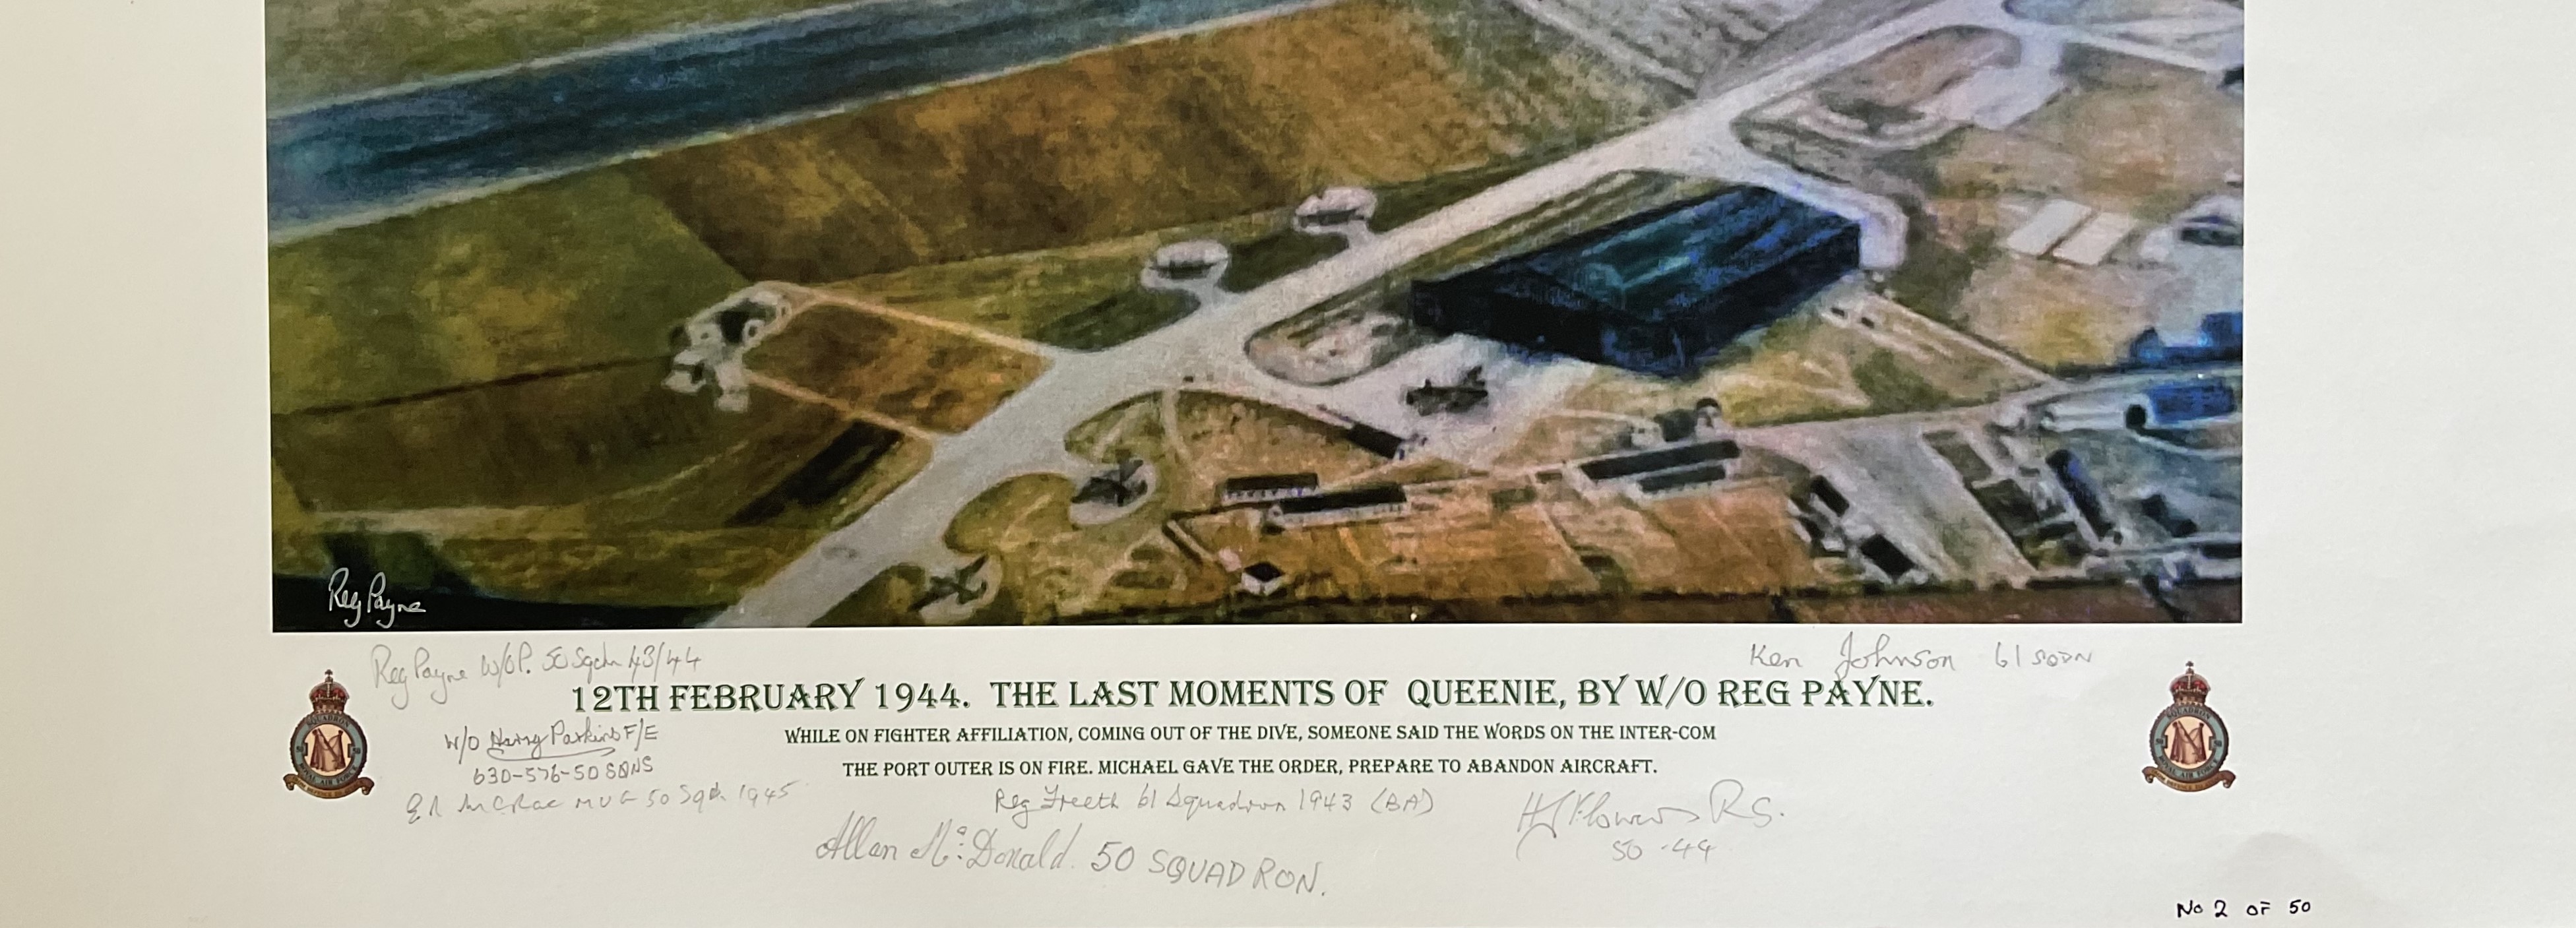 12th February 1944. The Last Moments of Queenie, By W/O Reg Payne, Limited Edition Print, Signed - Image 2 of 2